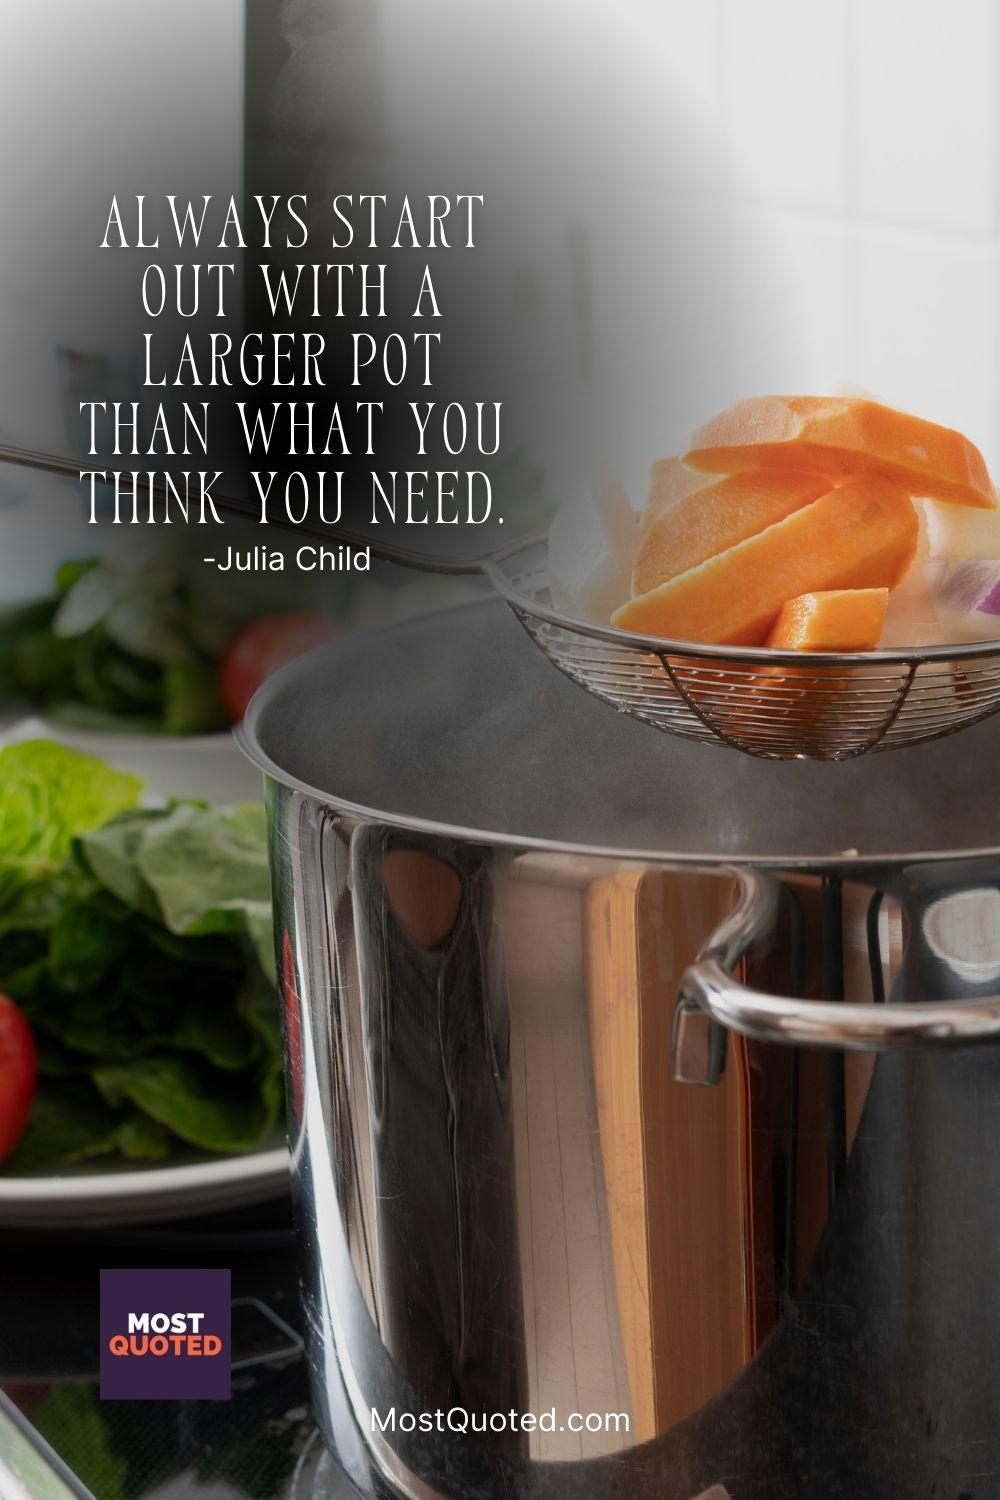 Always start out with a larger pot than what you think you need. - Julia Child